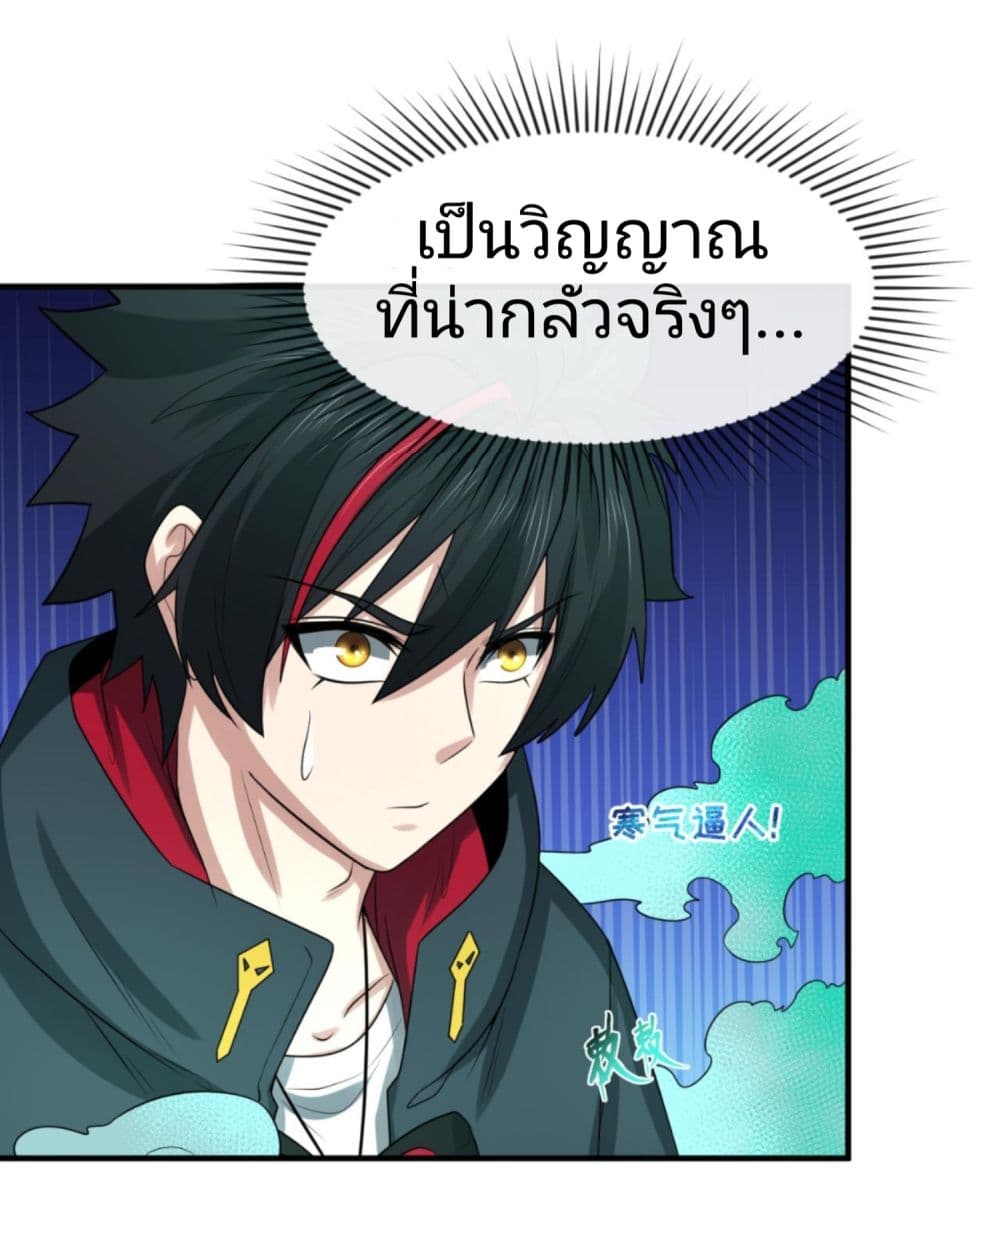 The Age of Ghost Spirits à¸à¸­à¸à¸à¸µà¹ 46 (7)